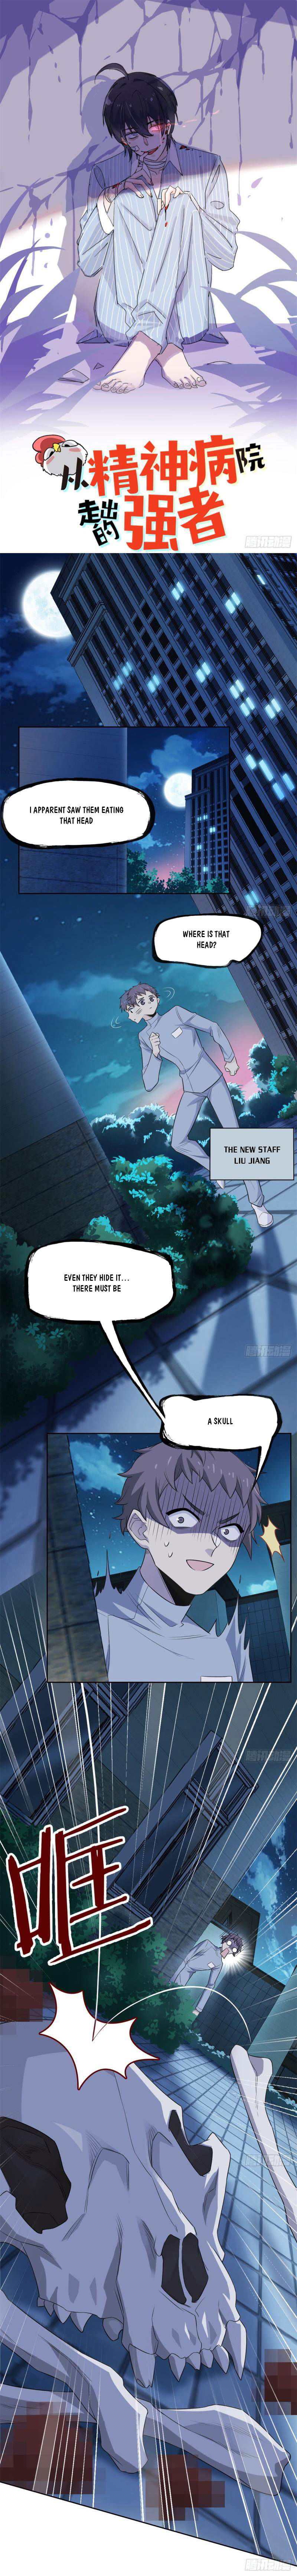 The Strong Man From The Mental Hospital Chapter 26 page 2